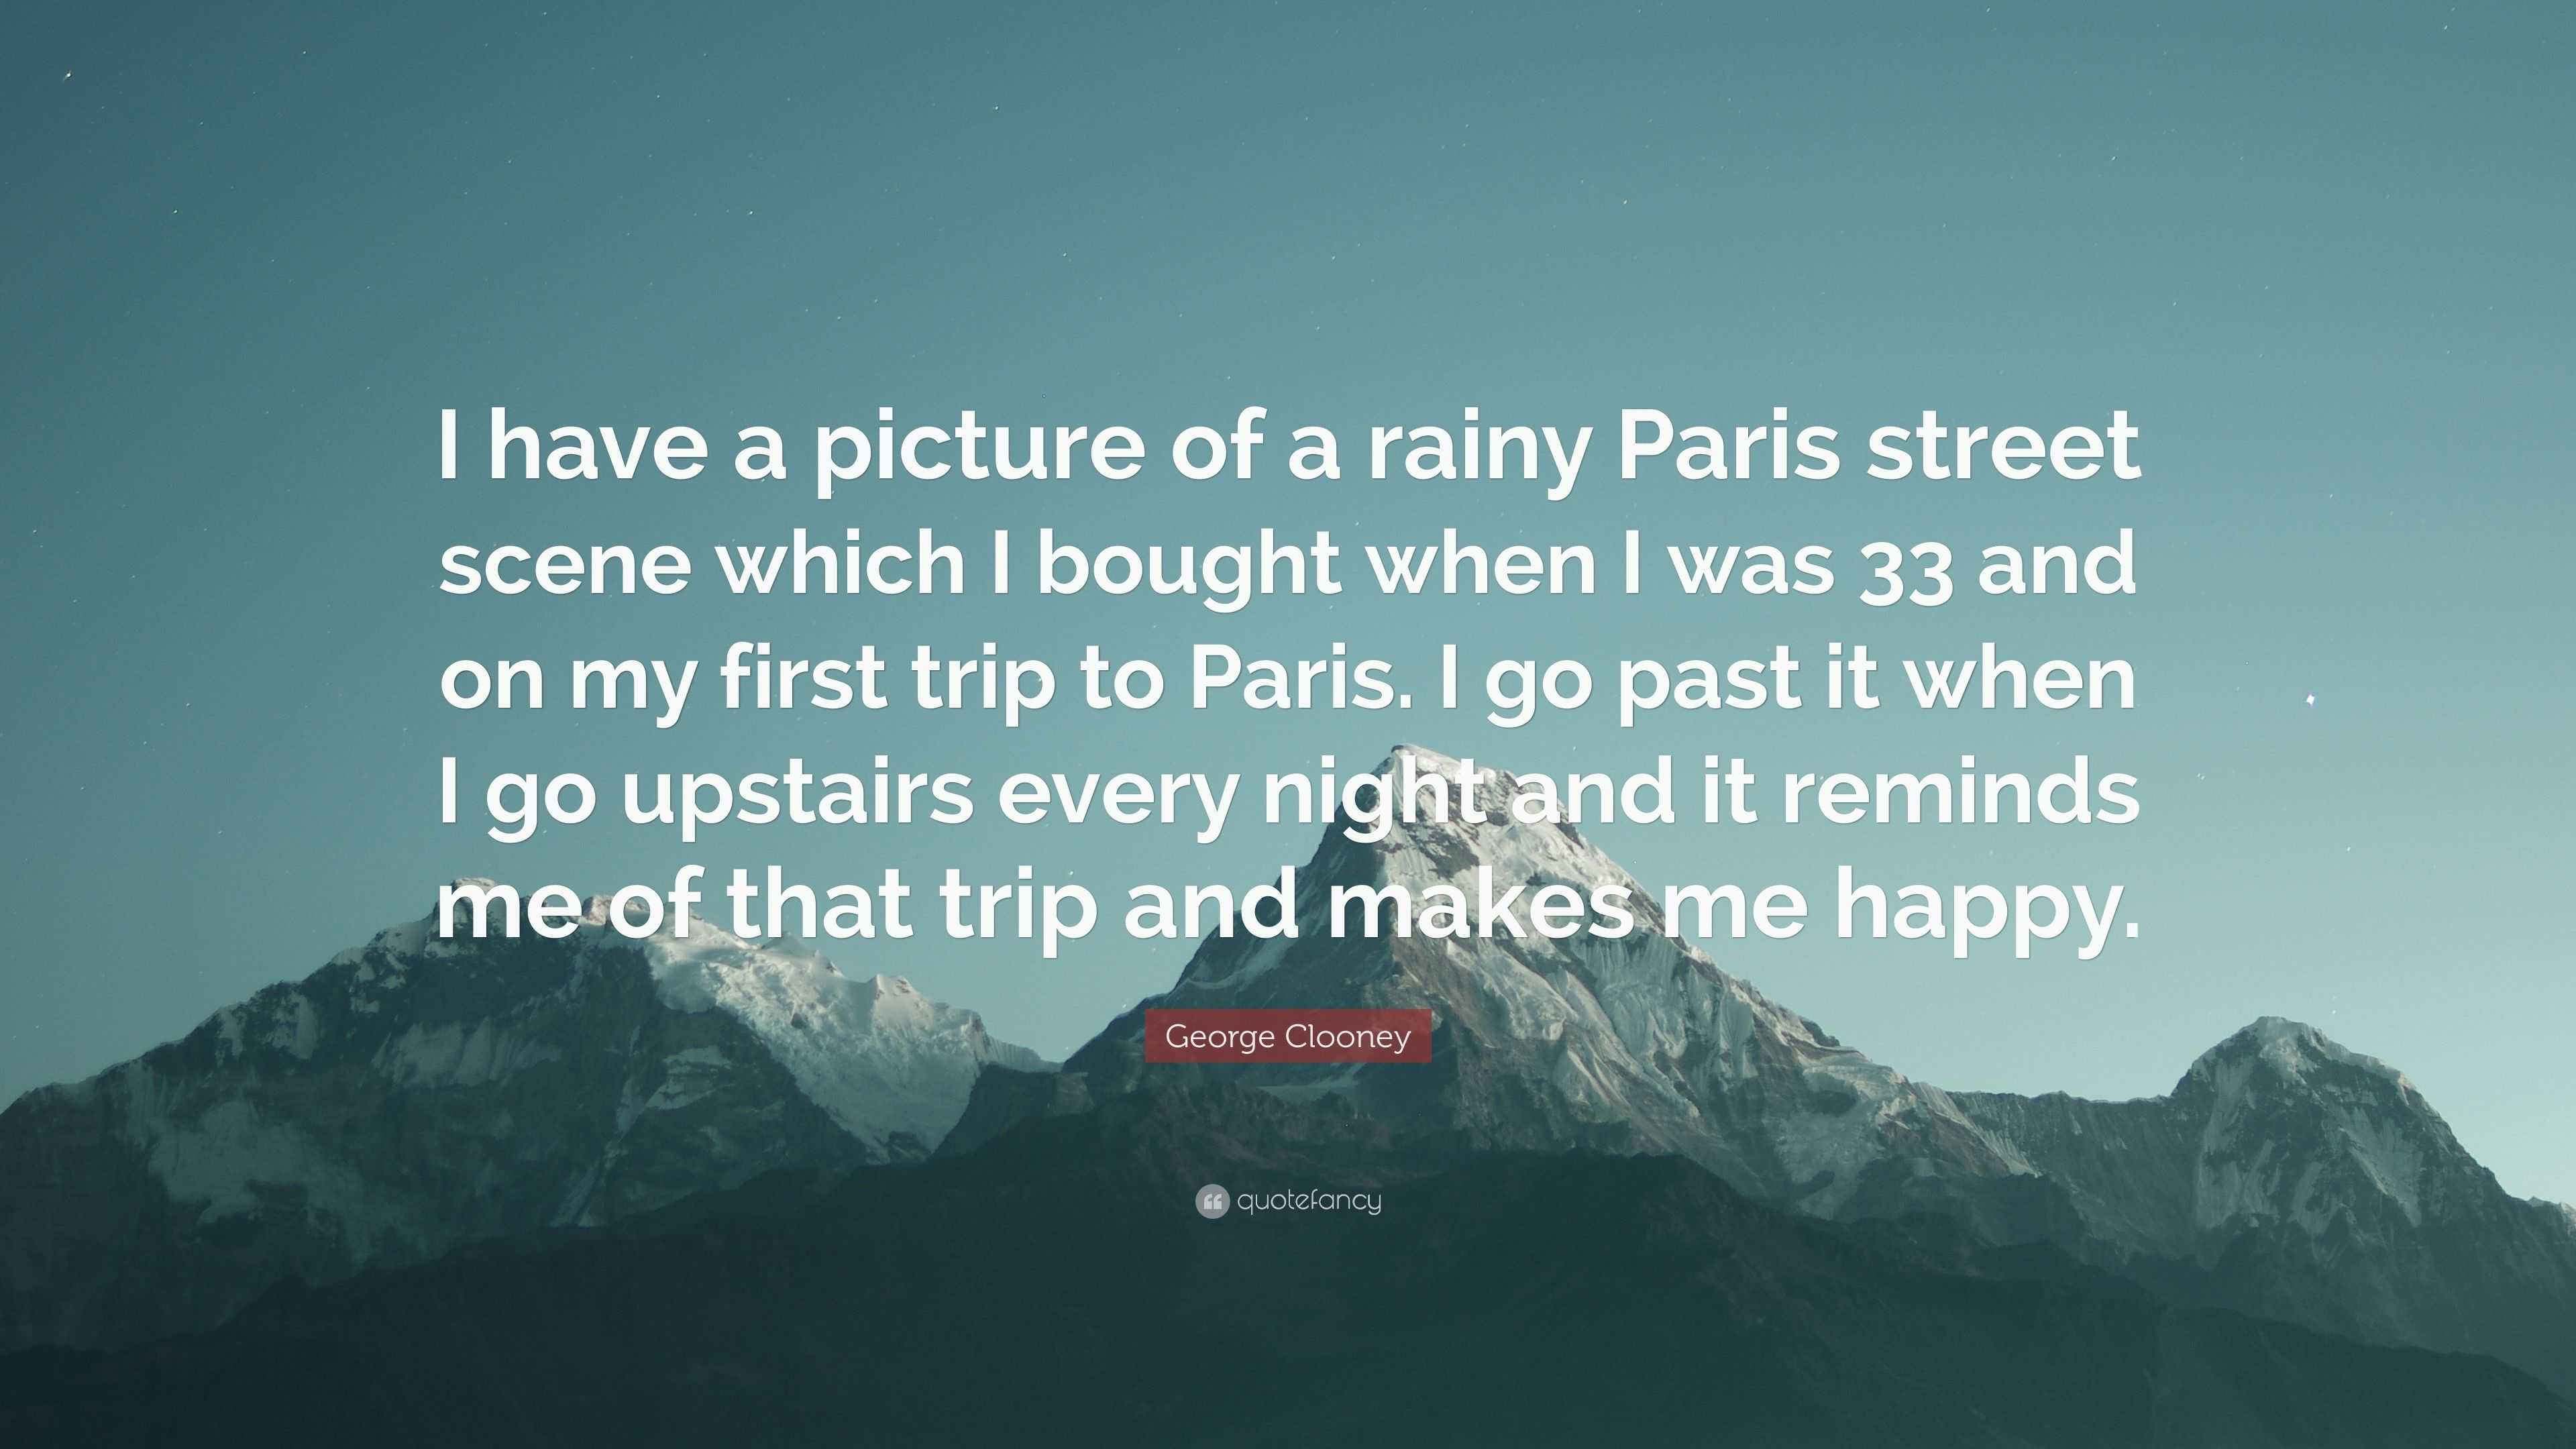 George Clooney Quote: “I have a picture of a rainy Paris street scene ...